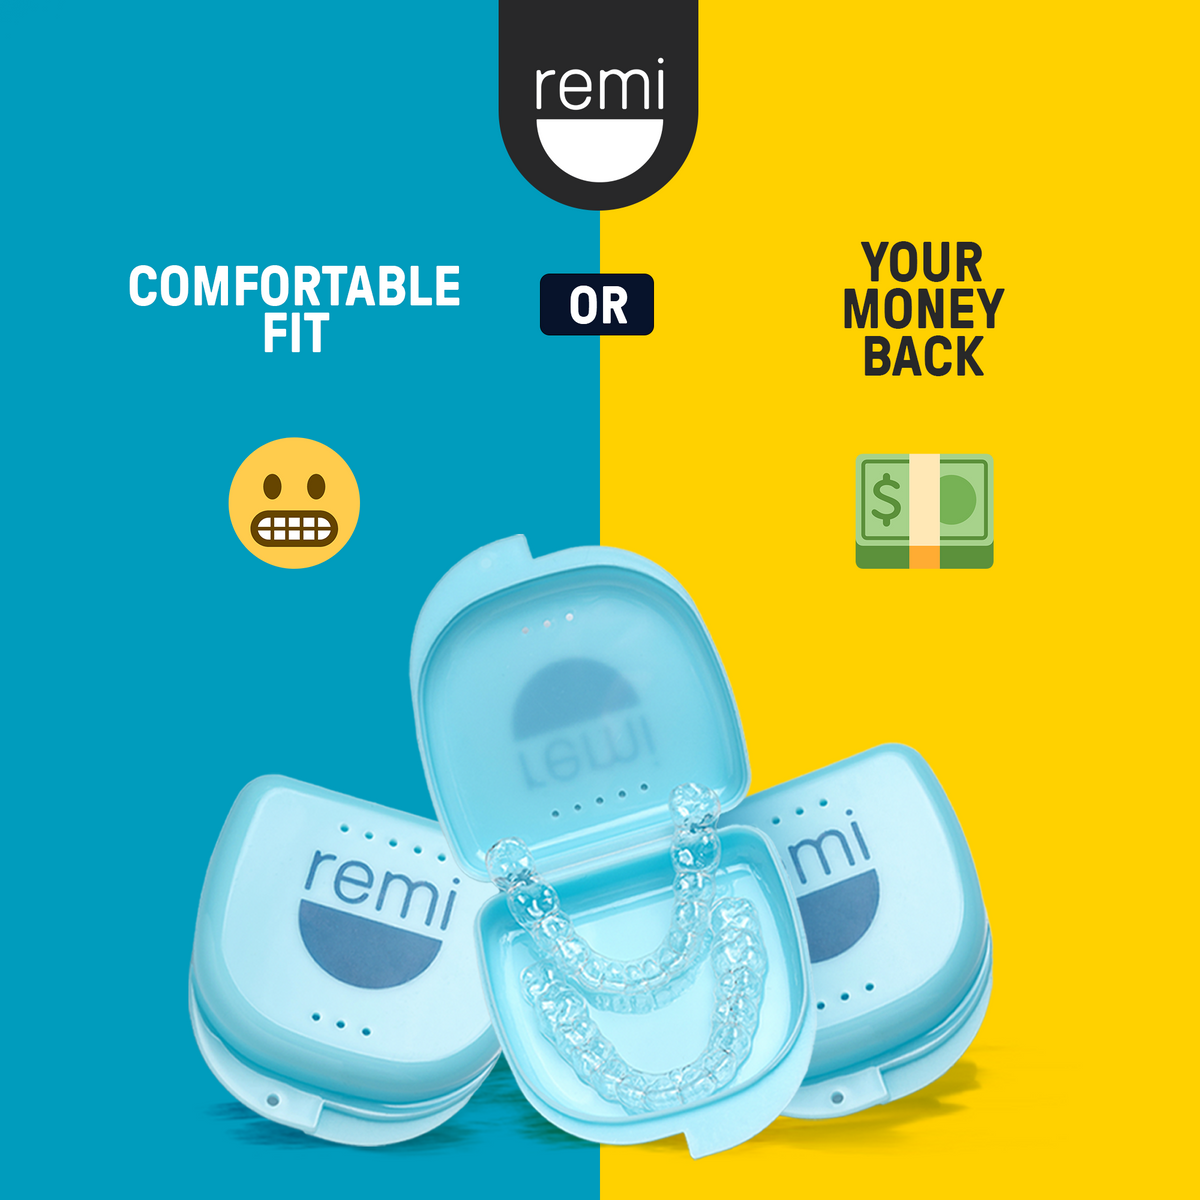 Advertisement featuring Custom Night Guards of dental-grade quality in open cases, with a &quot;comfortable fit or your money back&quot; guarantee, set against a blue and yellow background.